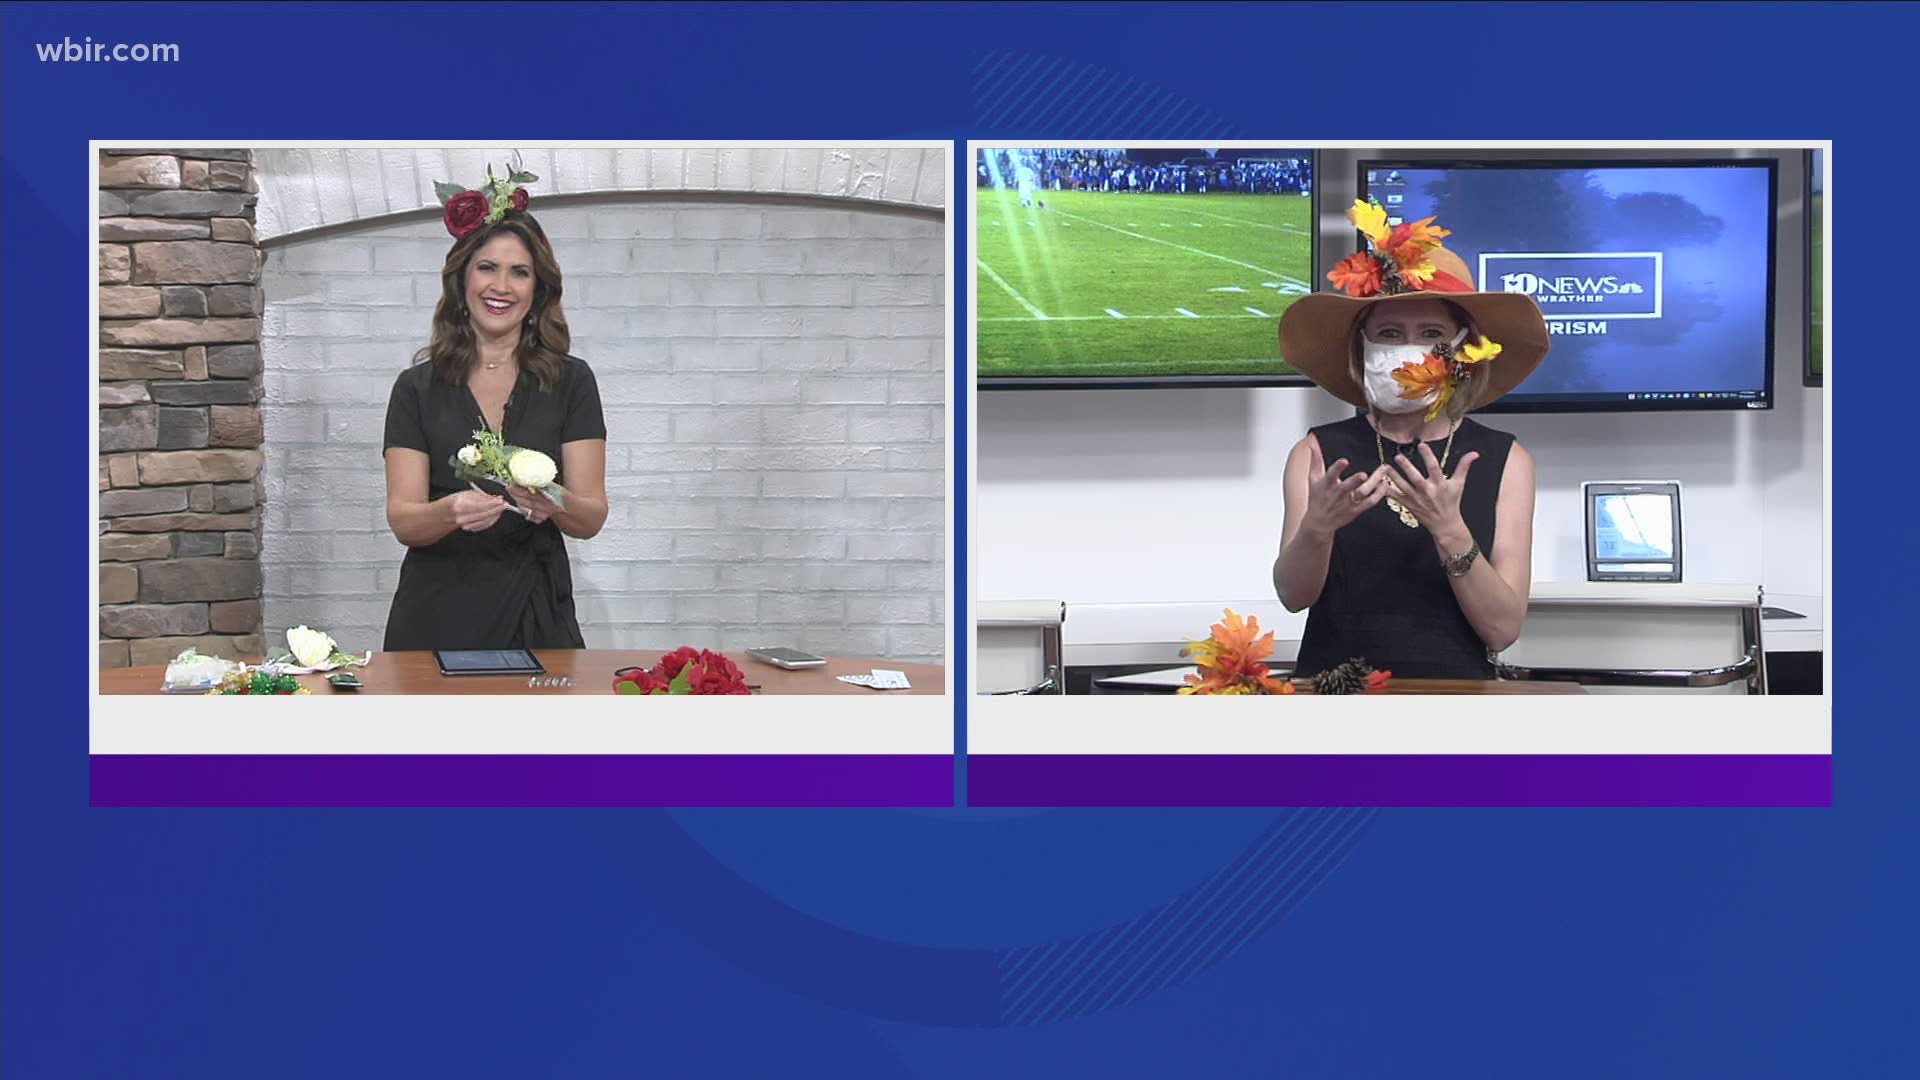 The Kentucky Derby is this weekend. This year, instead of decorating hats, Cassie & Beth decorated face masks. Sept. 4, 2020-4pm.